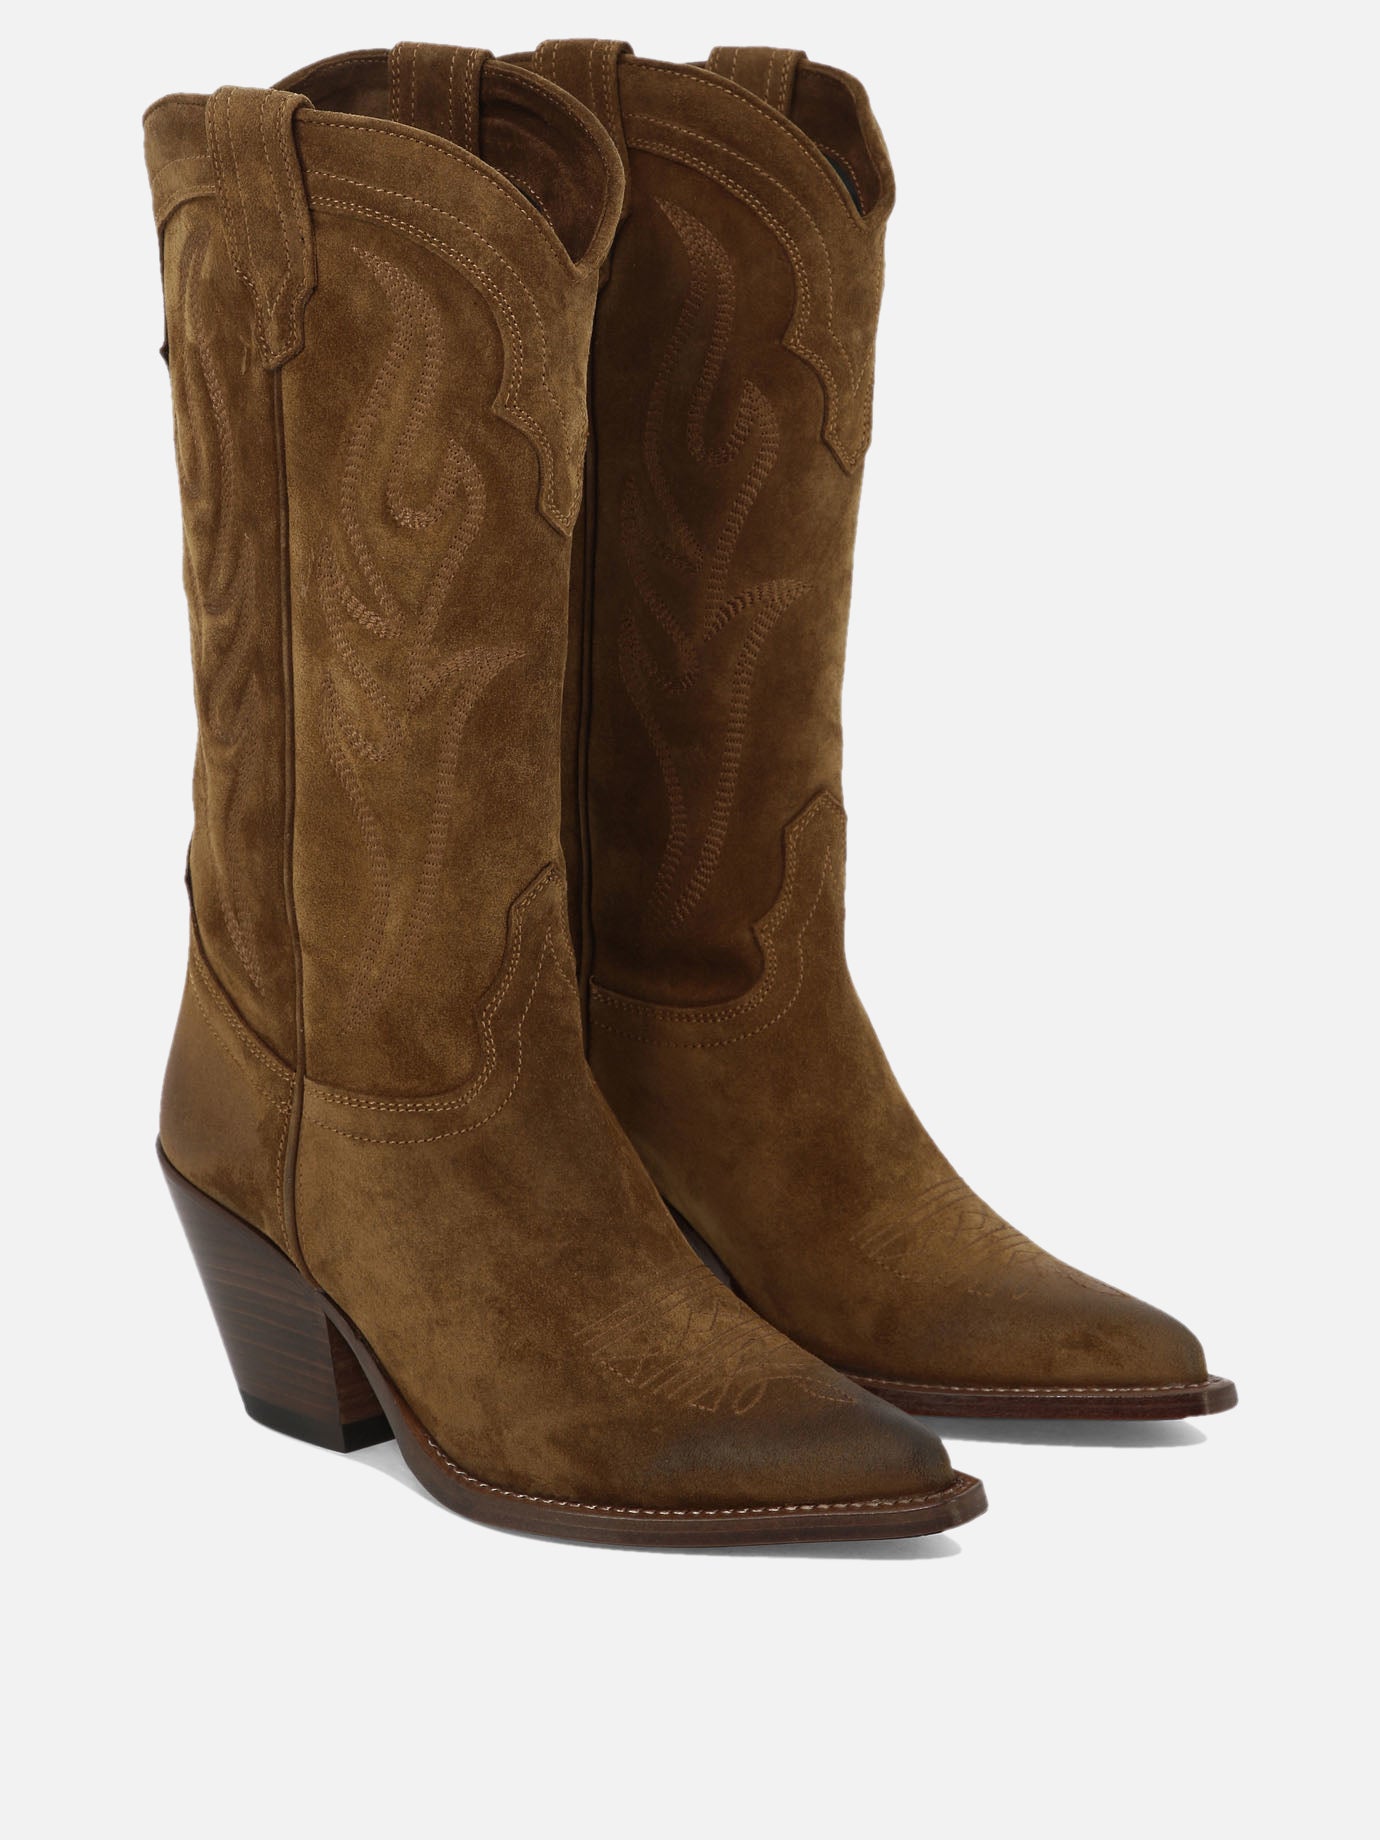 "Santa Fe" ankle boots